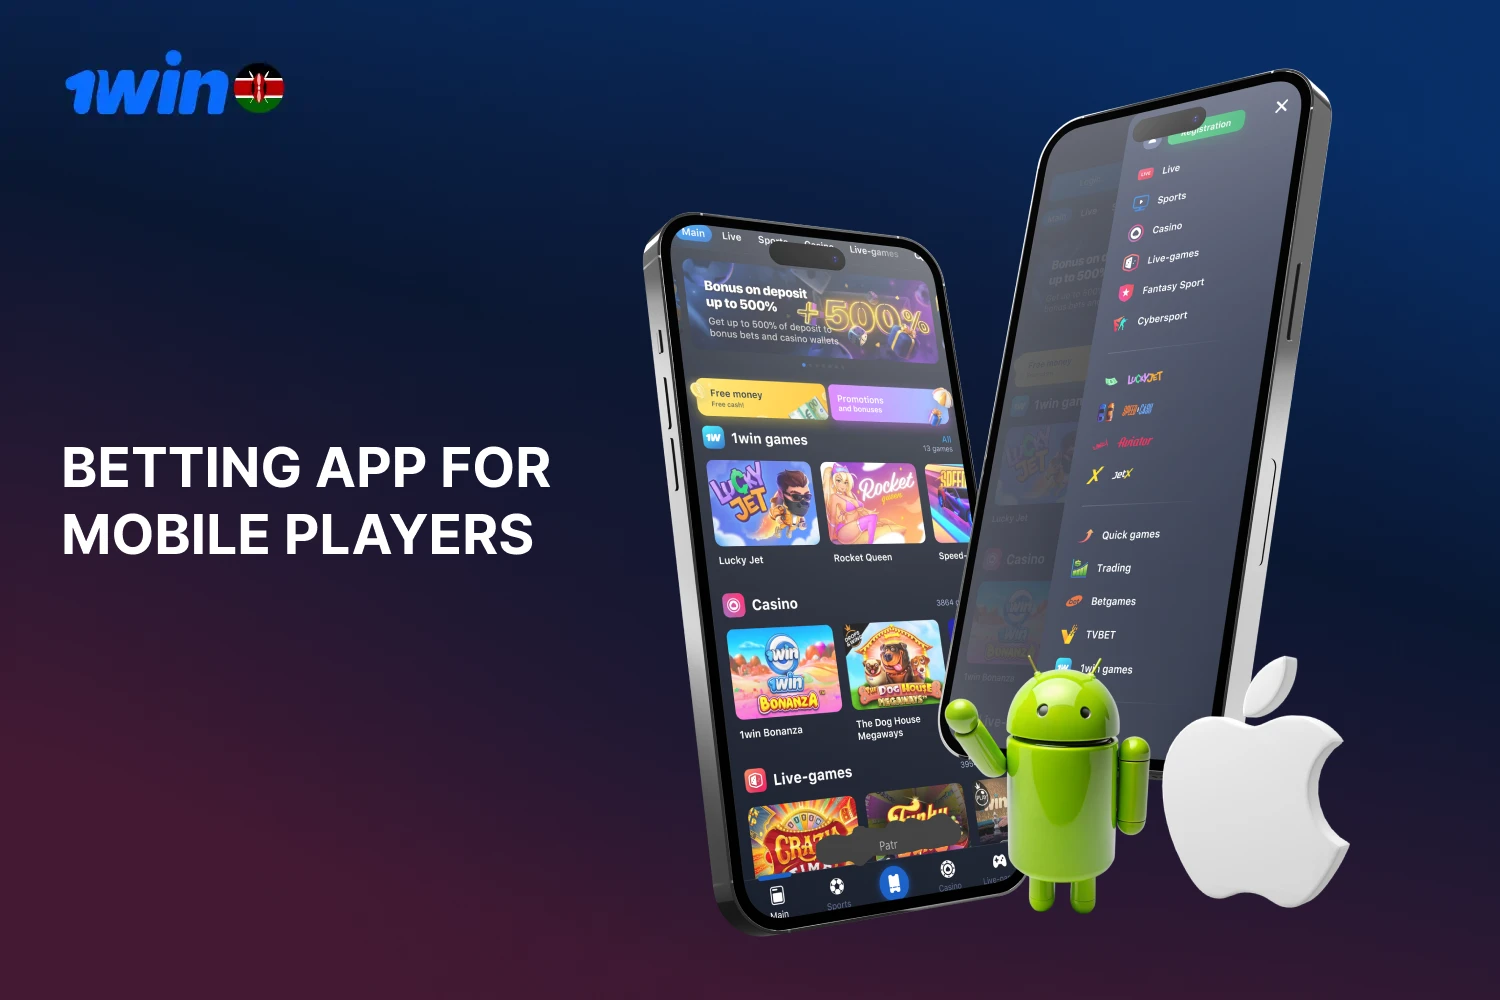 Every gambler from Kenya can get a mobile app to play at 1win